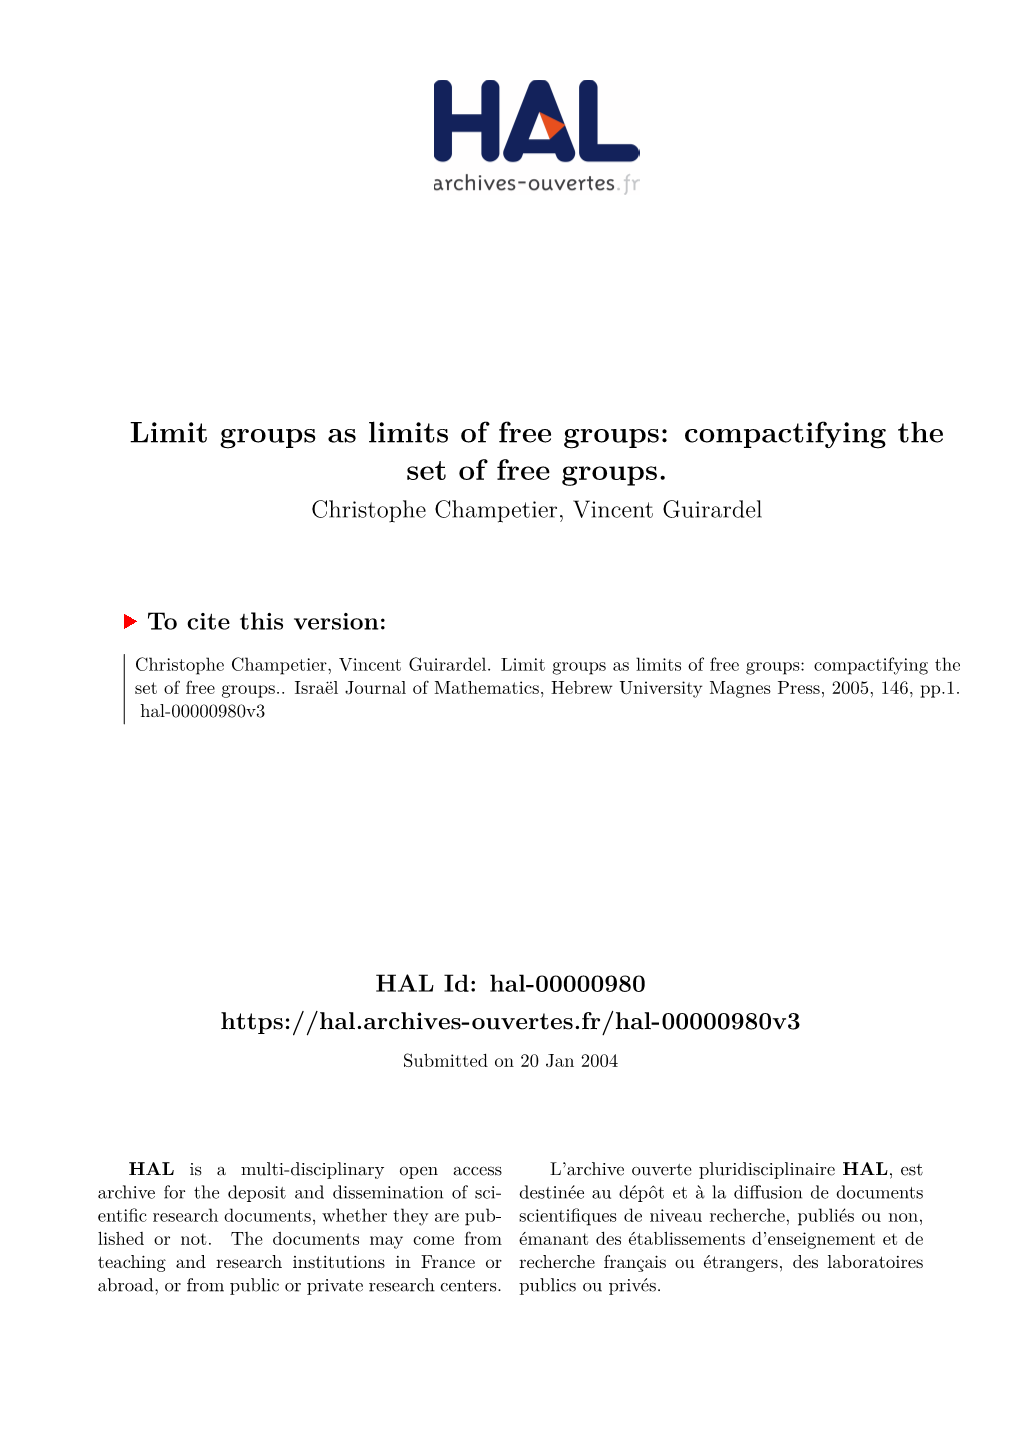 Limit Groups As Limits of Free Groups: Compactifying the Set of Free Groups. Christophe Champetier, Vincent Guirardel